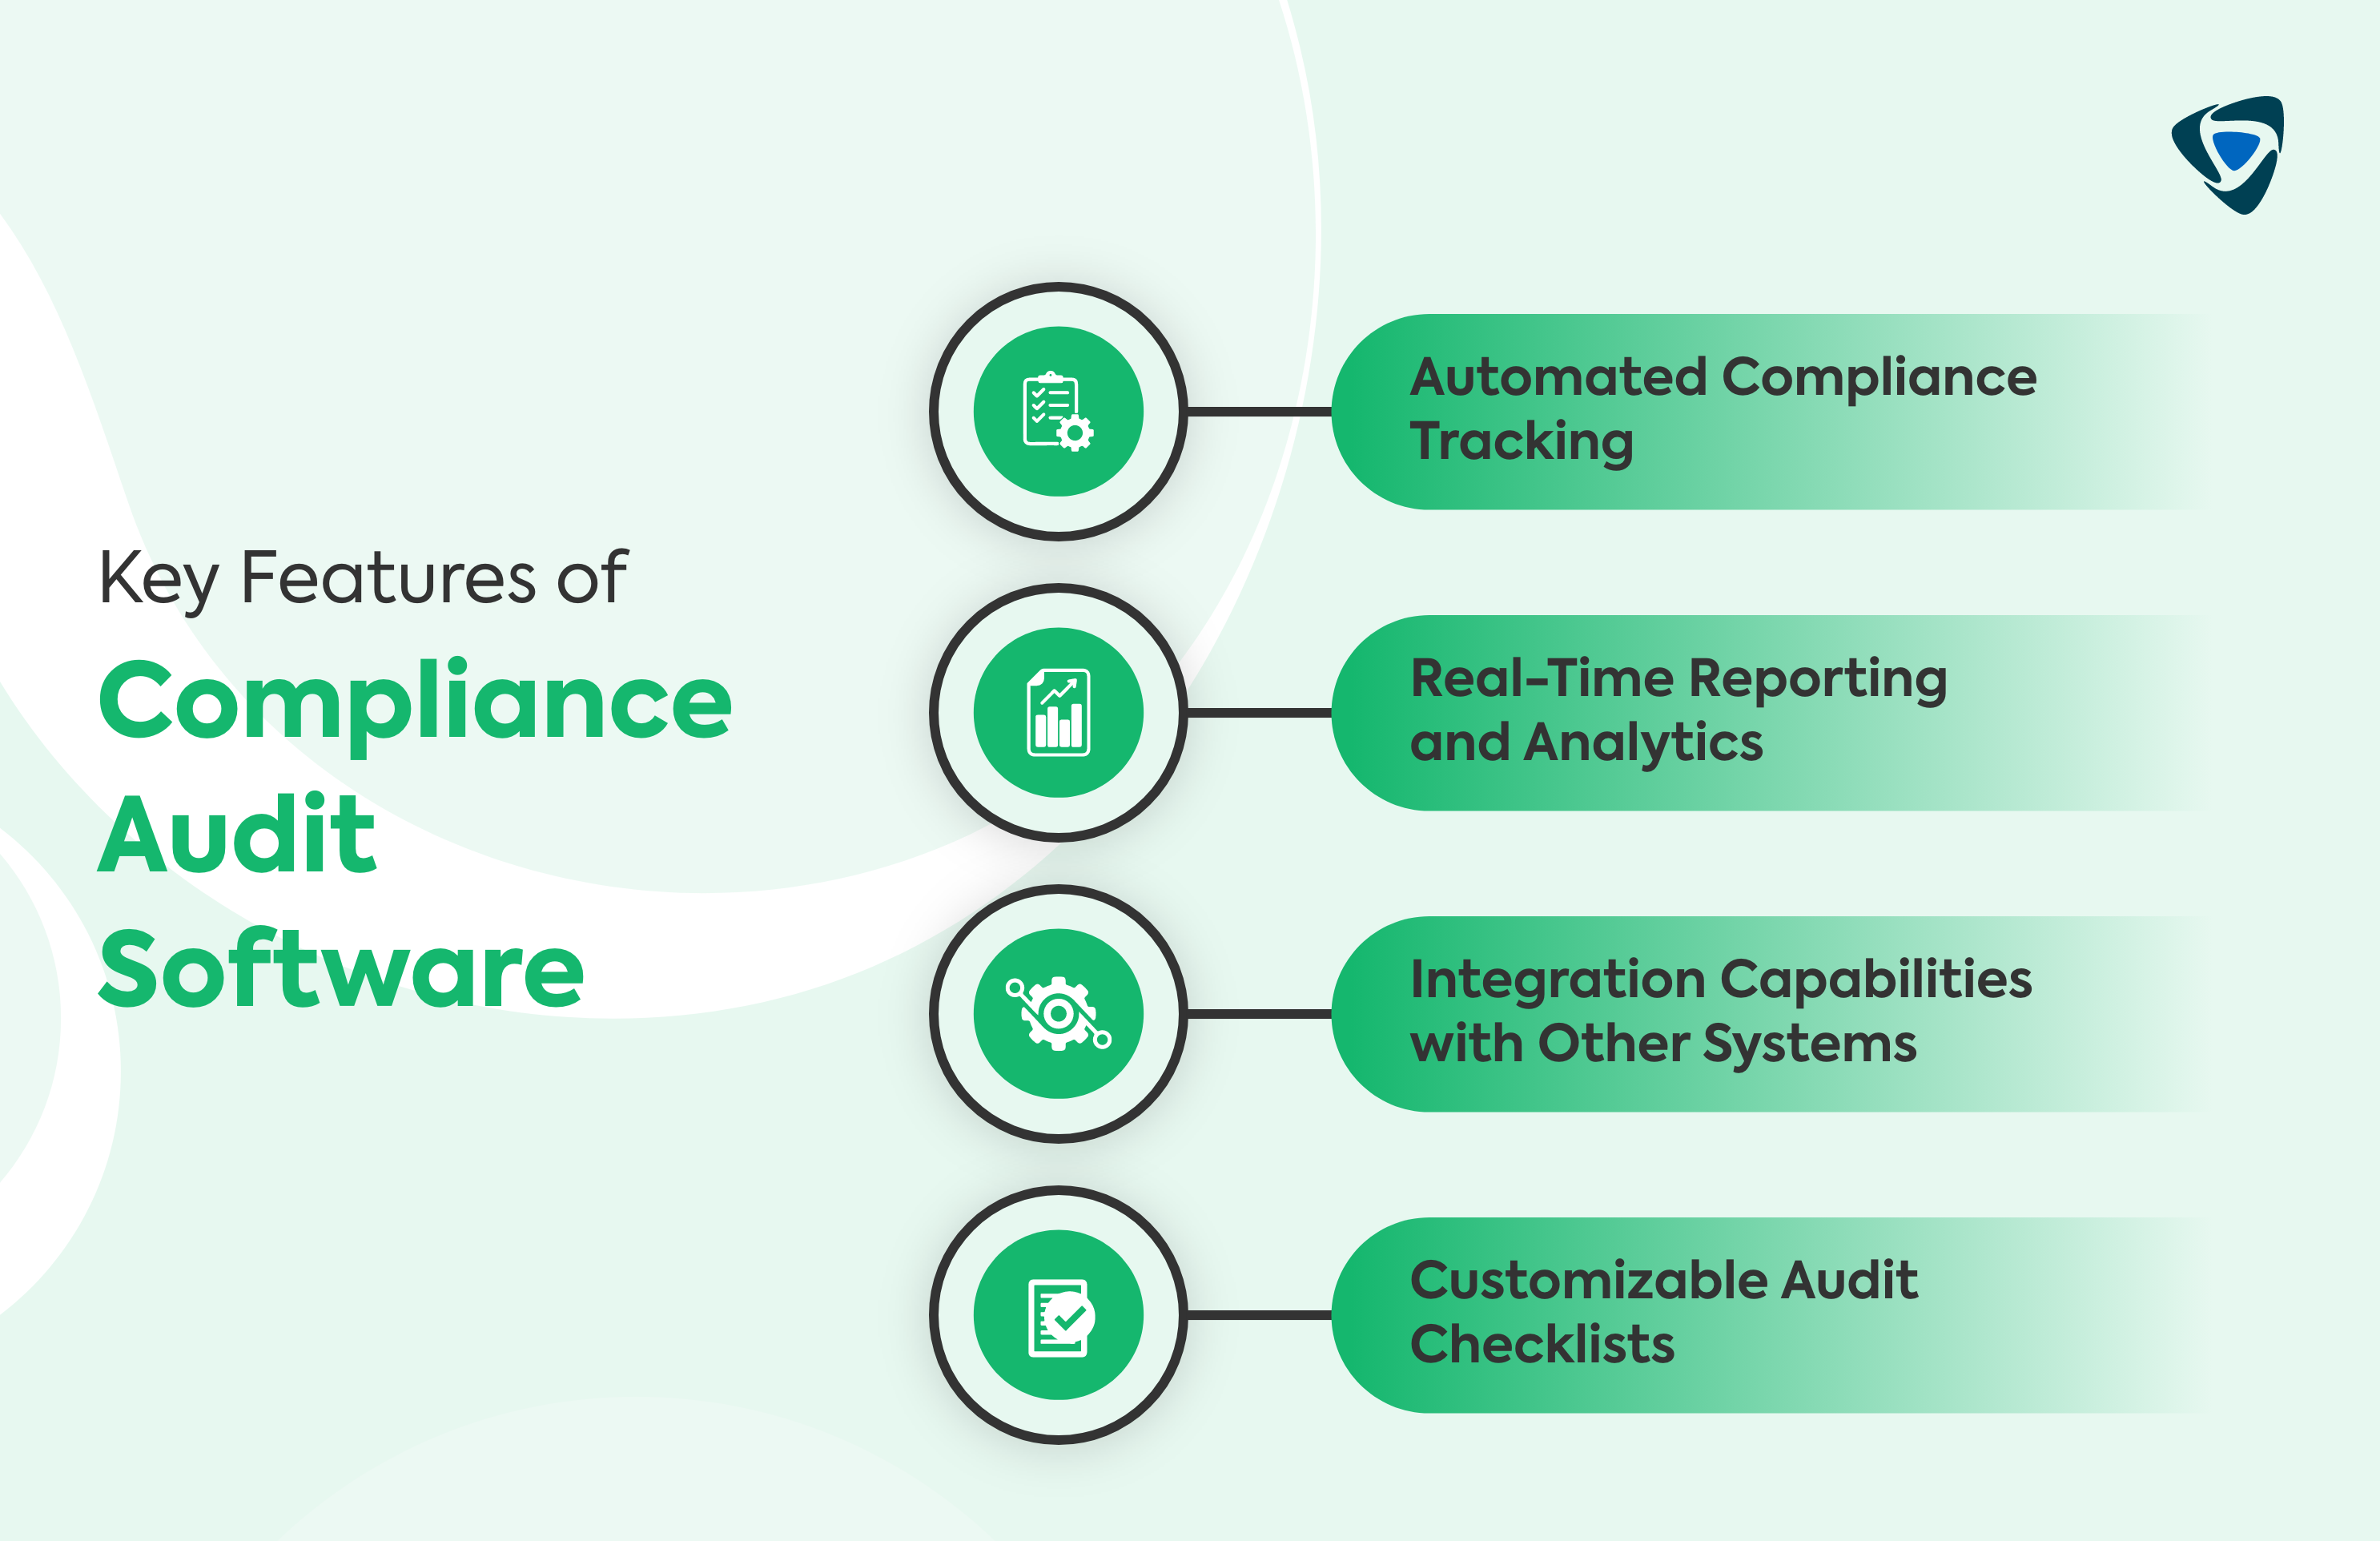 Key Features of Compliance Audit Software